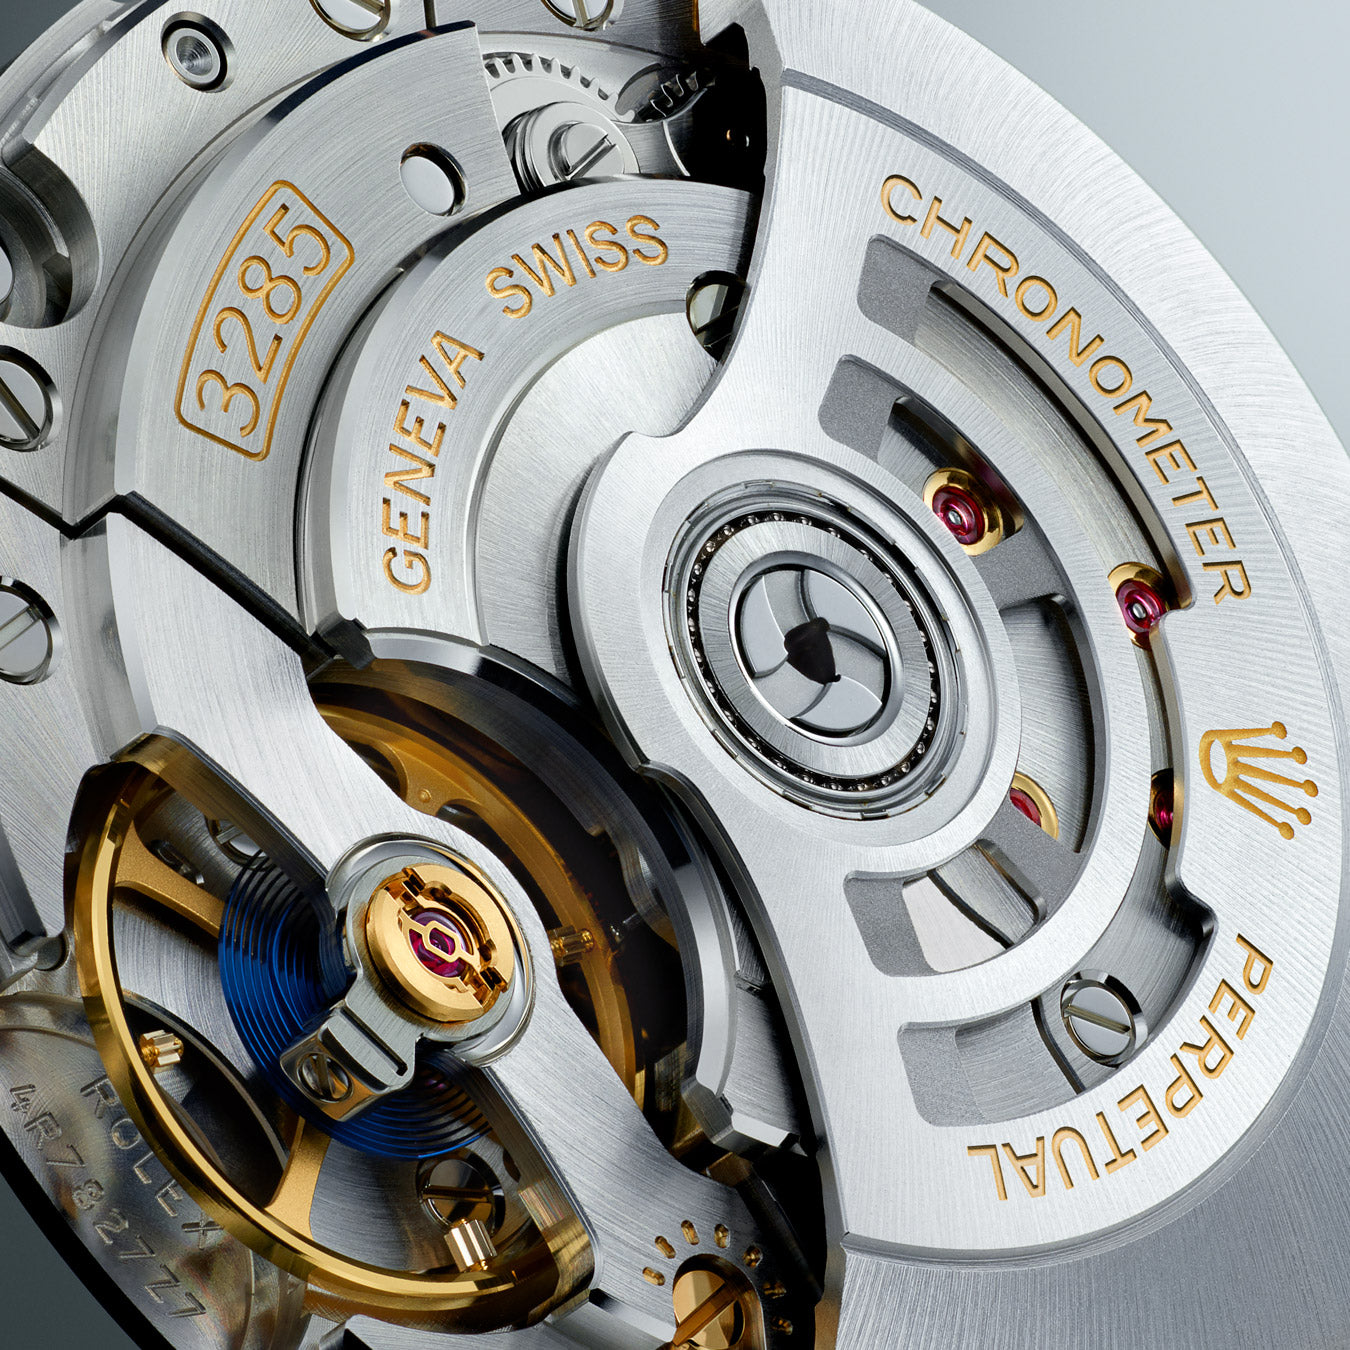 Rolex Oyster Perpetual GMT-Master II Chronometer Detail at Fink's Jewelers